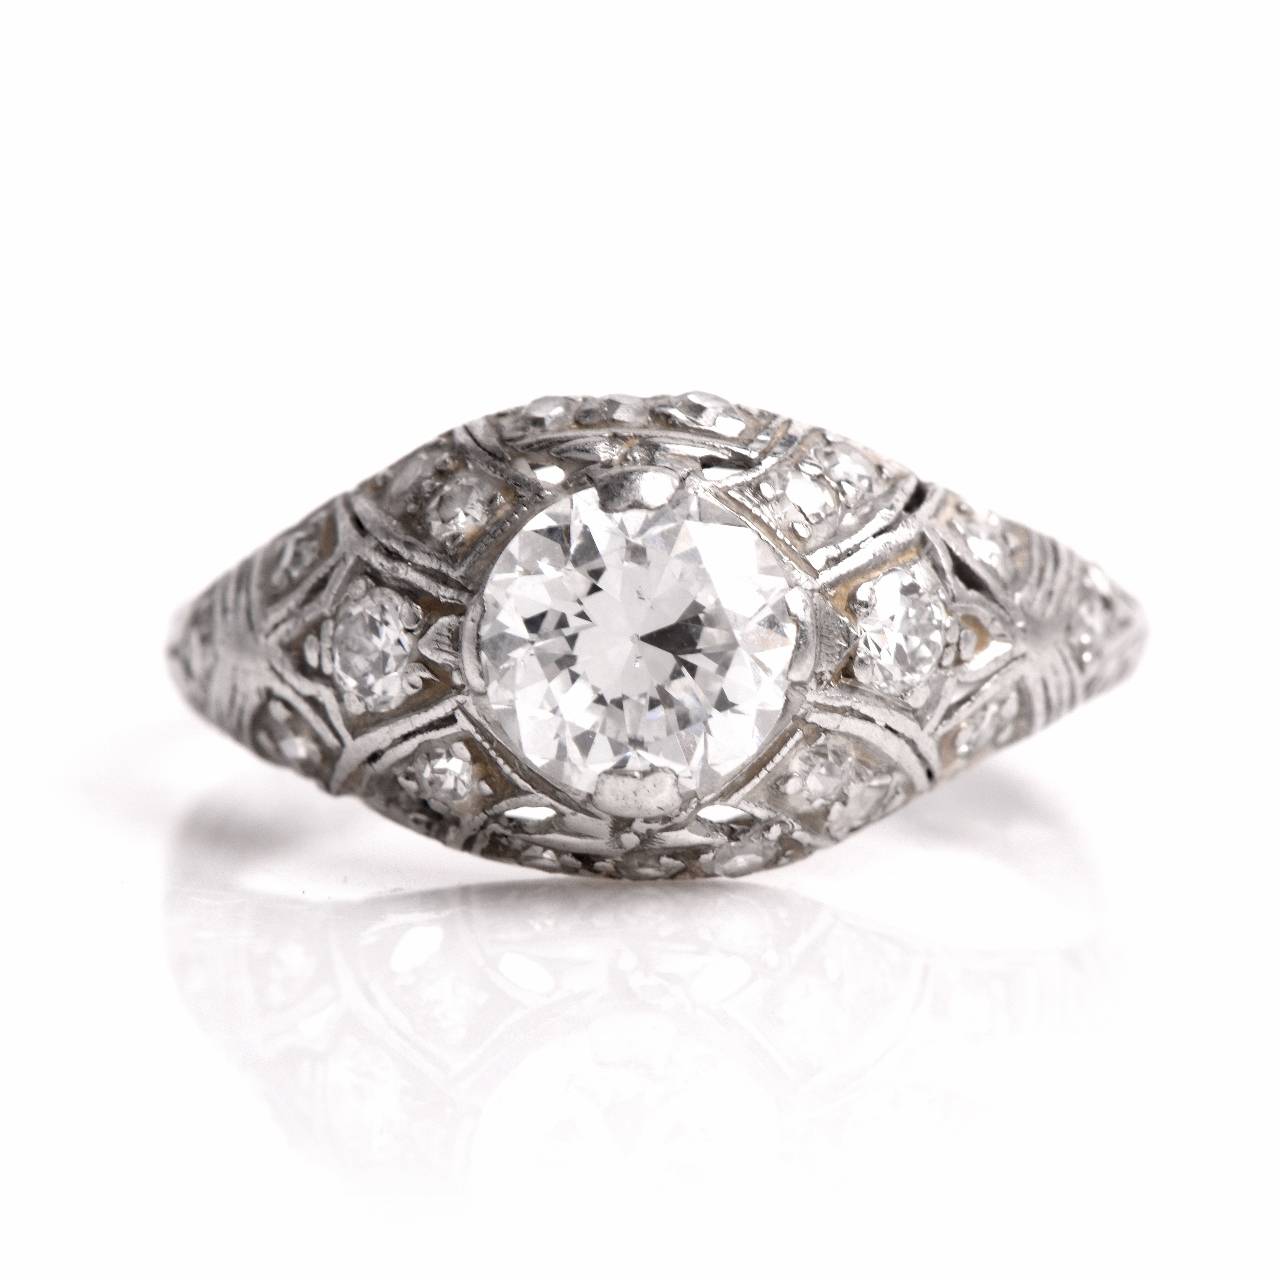 This antique  filigree engagement ring from the 1930's vintage era  is crafted in solid platinum, weighs approximately 3.00 grams and measures 5 mm high. Designed as a gracefully  domed  plaque, this delicate  vintage engagement ring exposes a